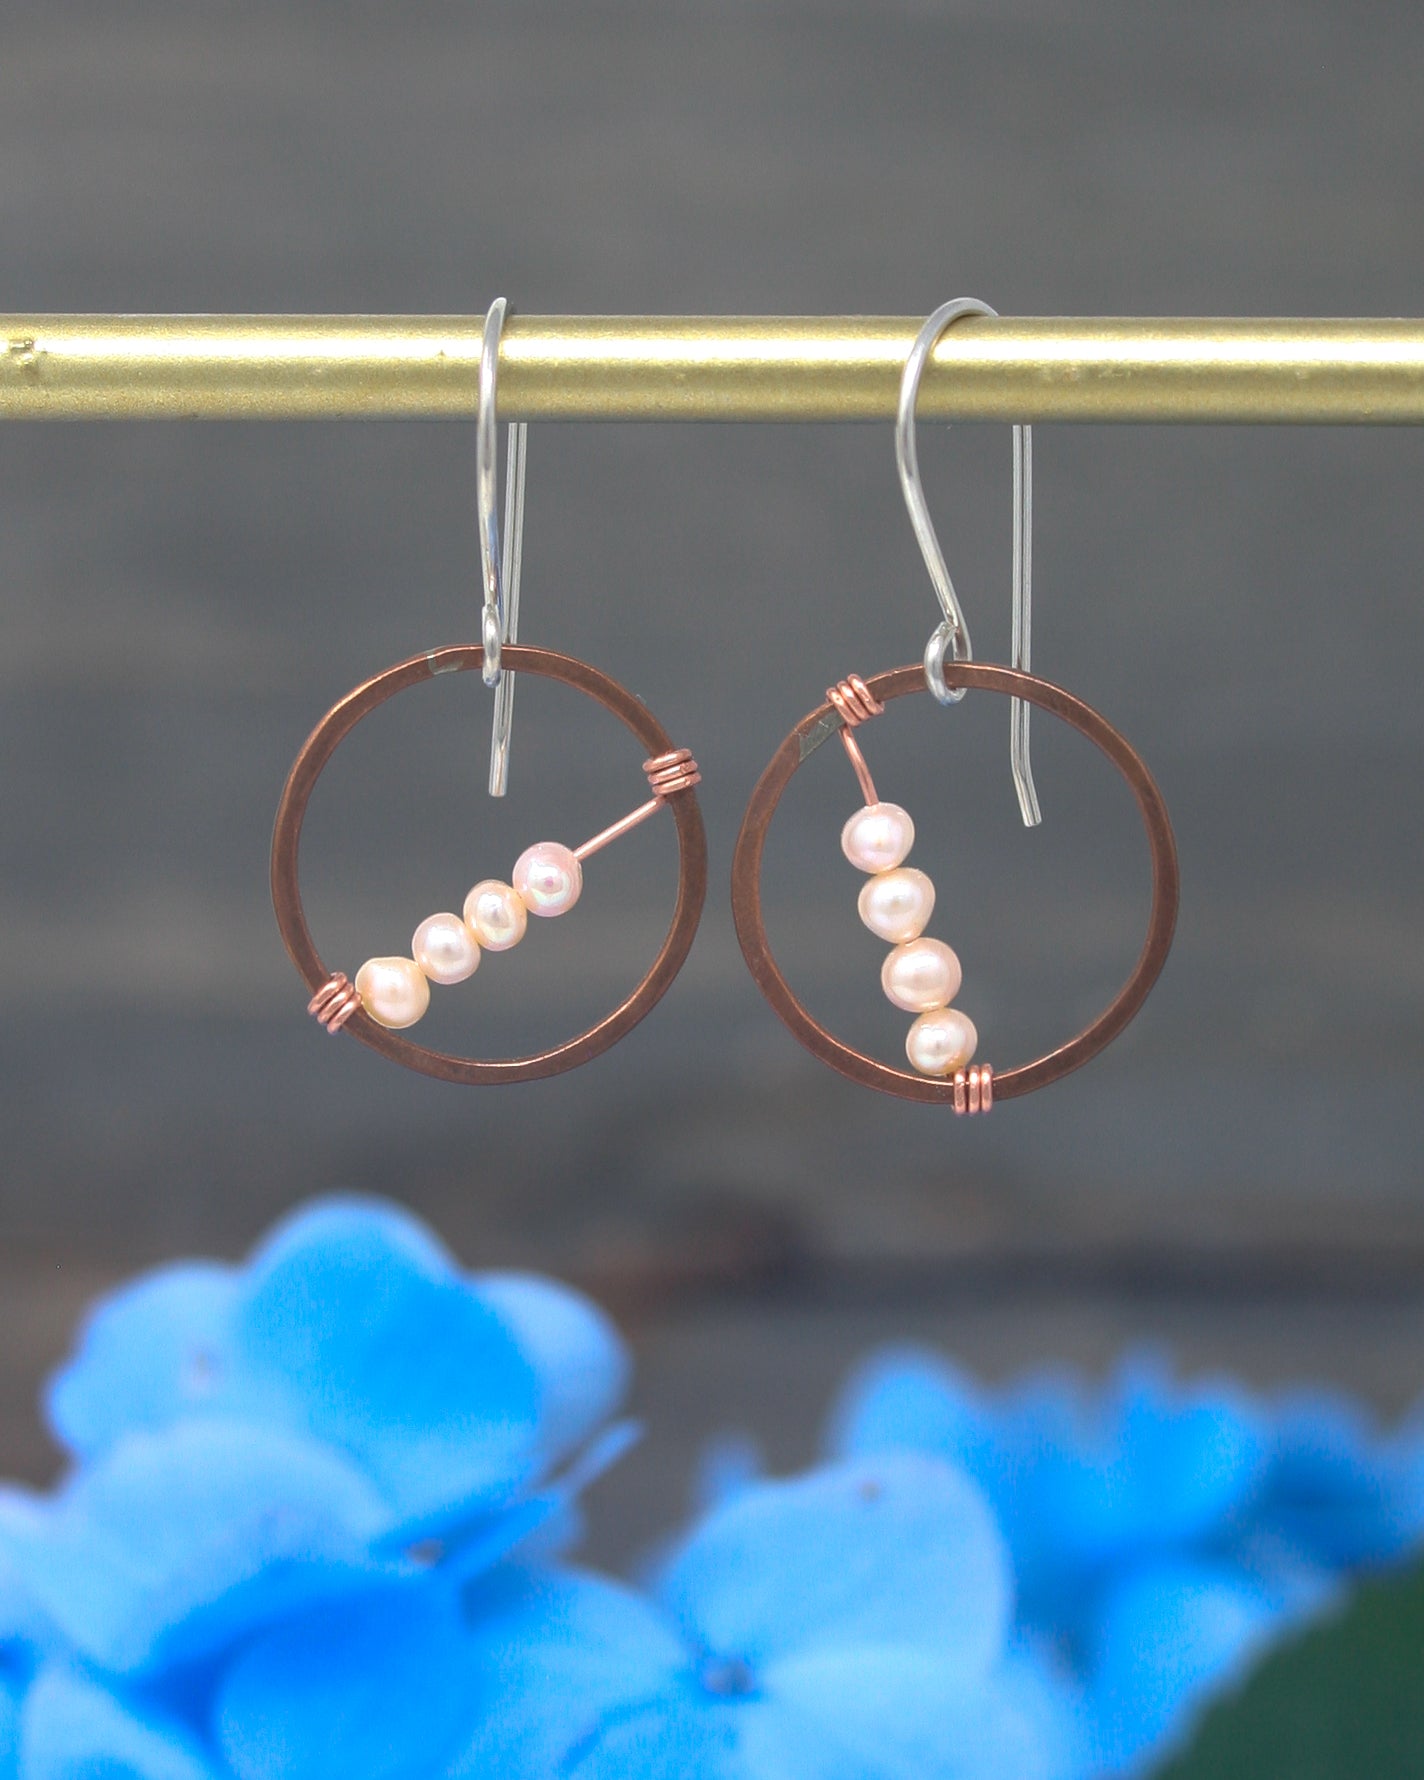 a pair of hoops with pearls hanging from them